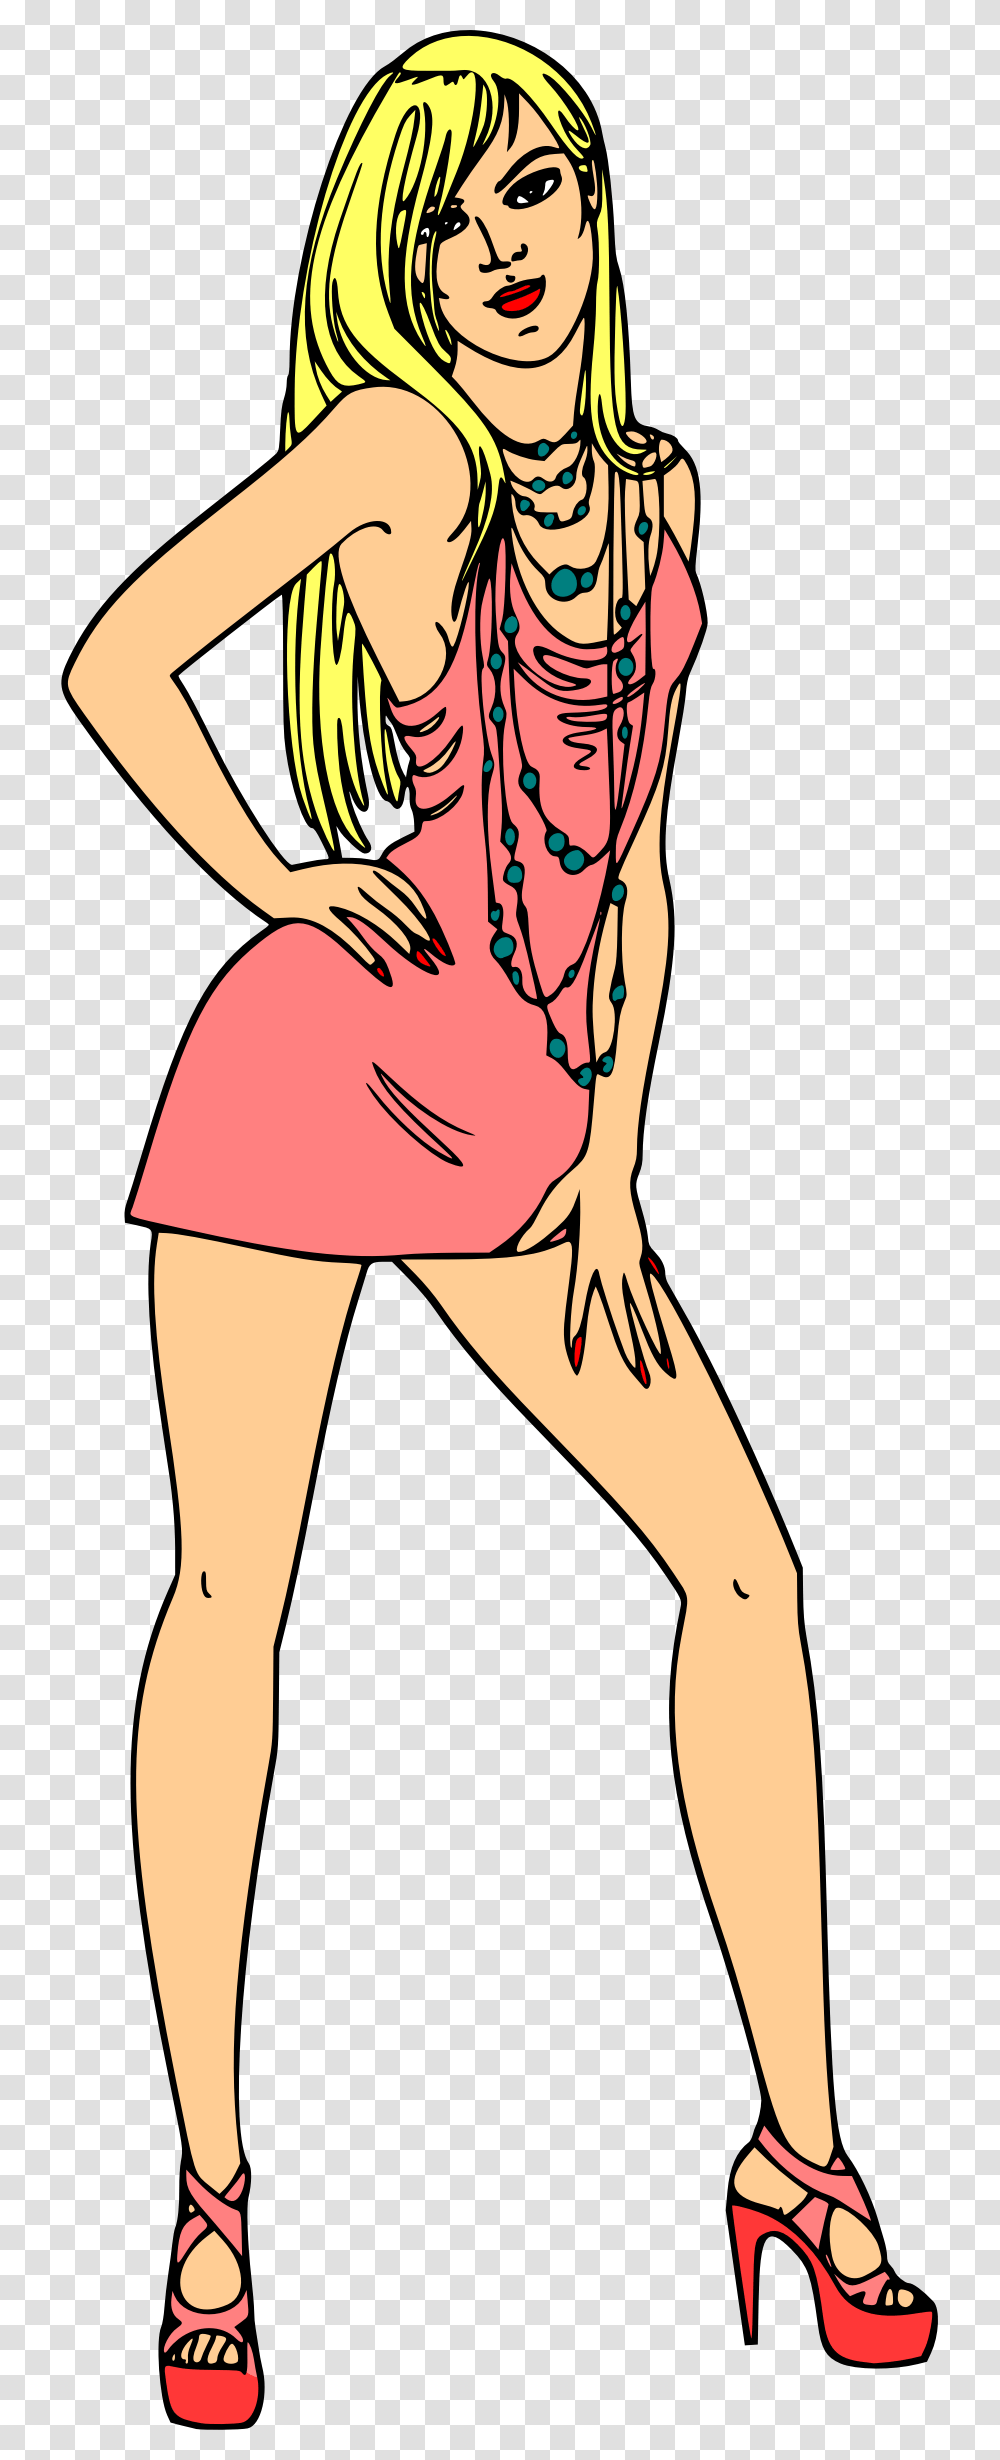 Woman In Short Pink Dress Clip Arts Blond, Female, Person, Girl Transparent Png